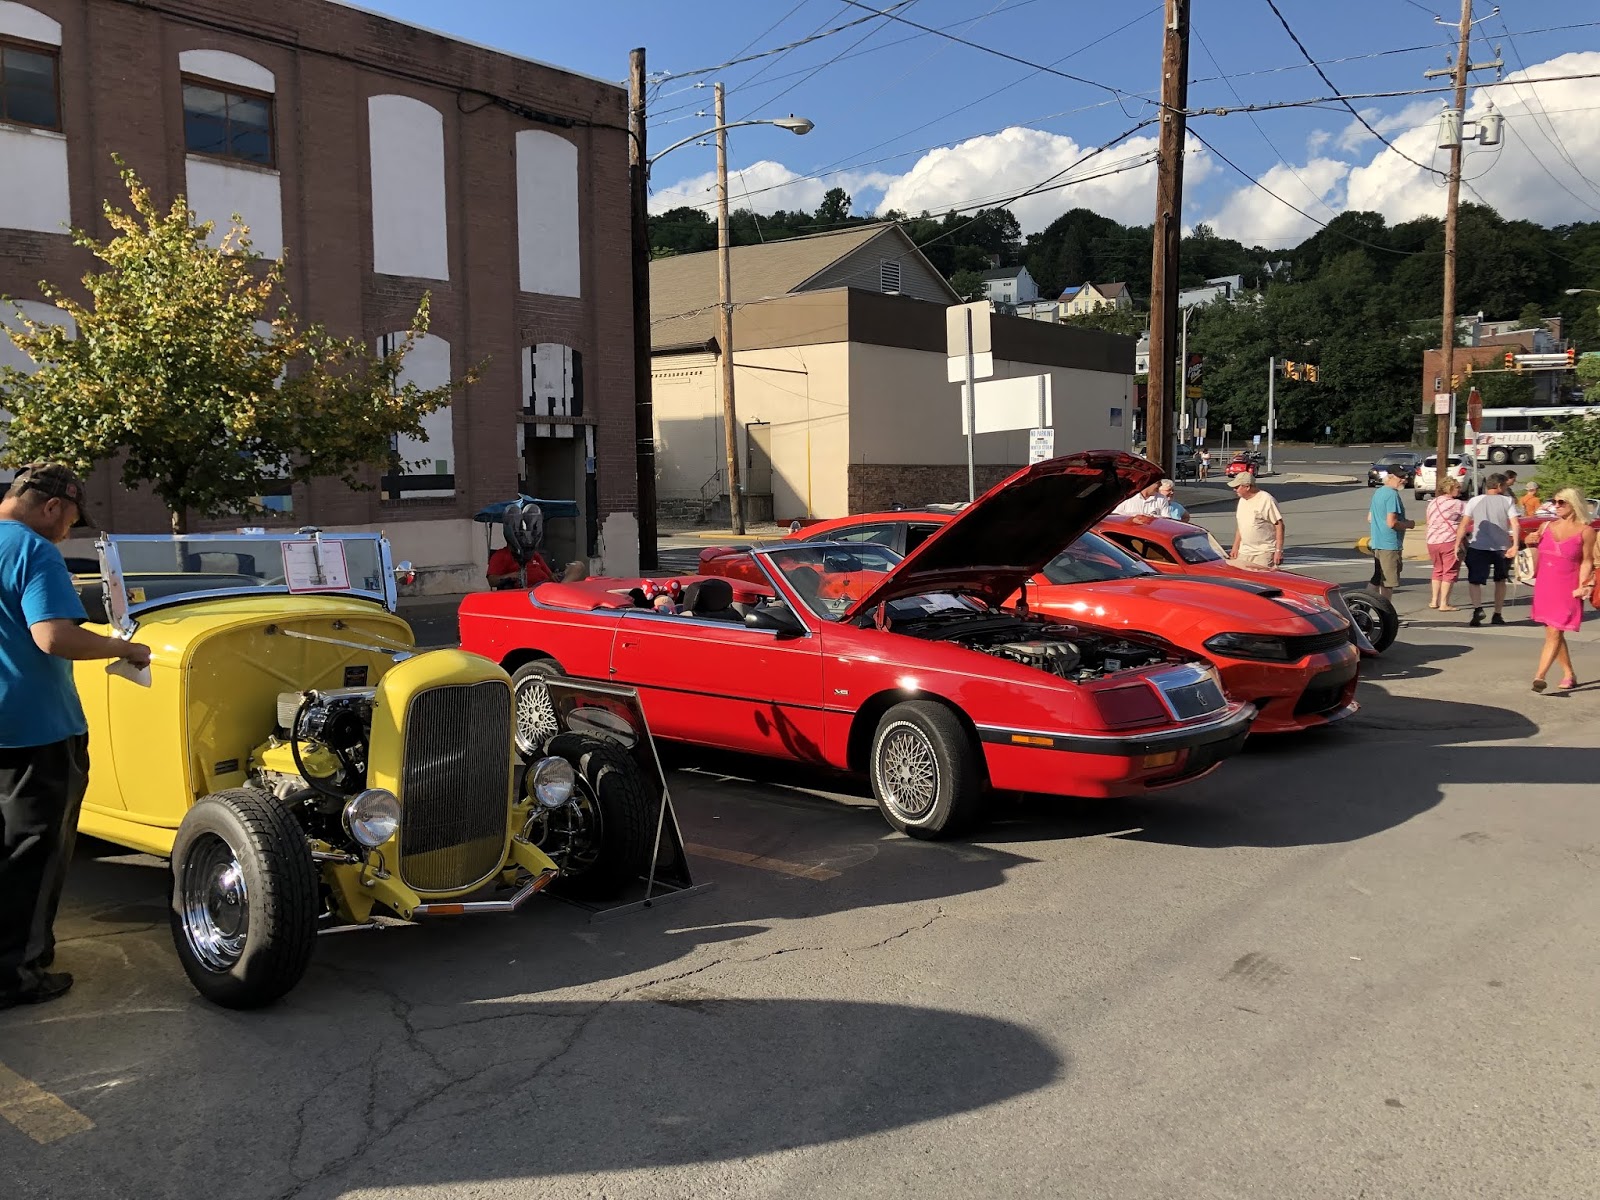 26th Anniversary of Great Pottsville Cruise Delights Car Enthusiasts